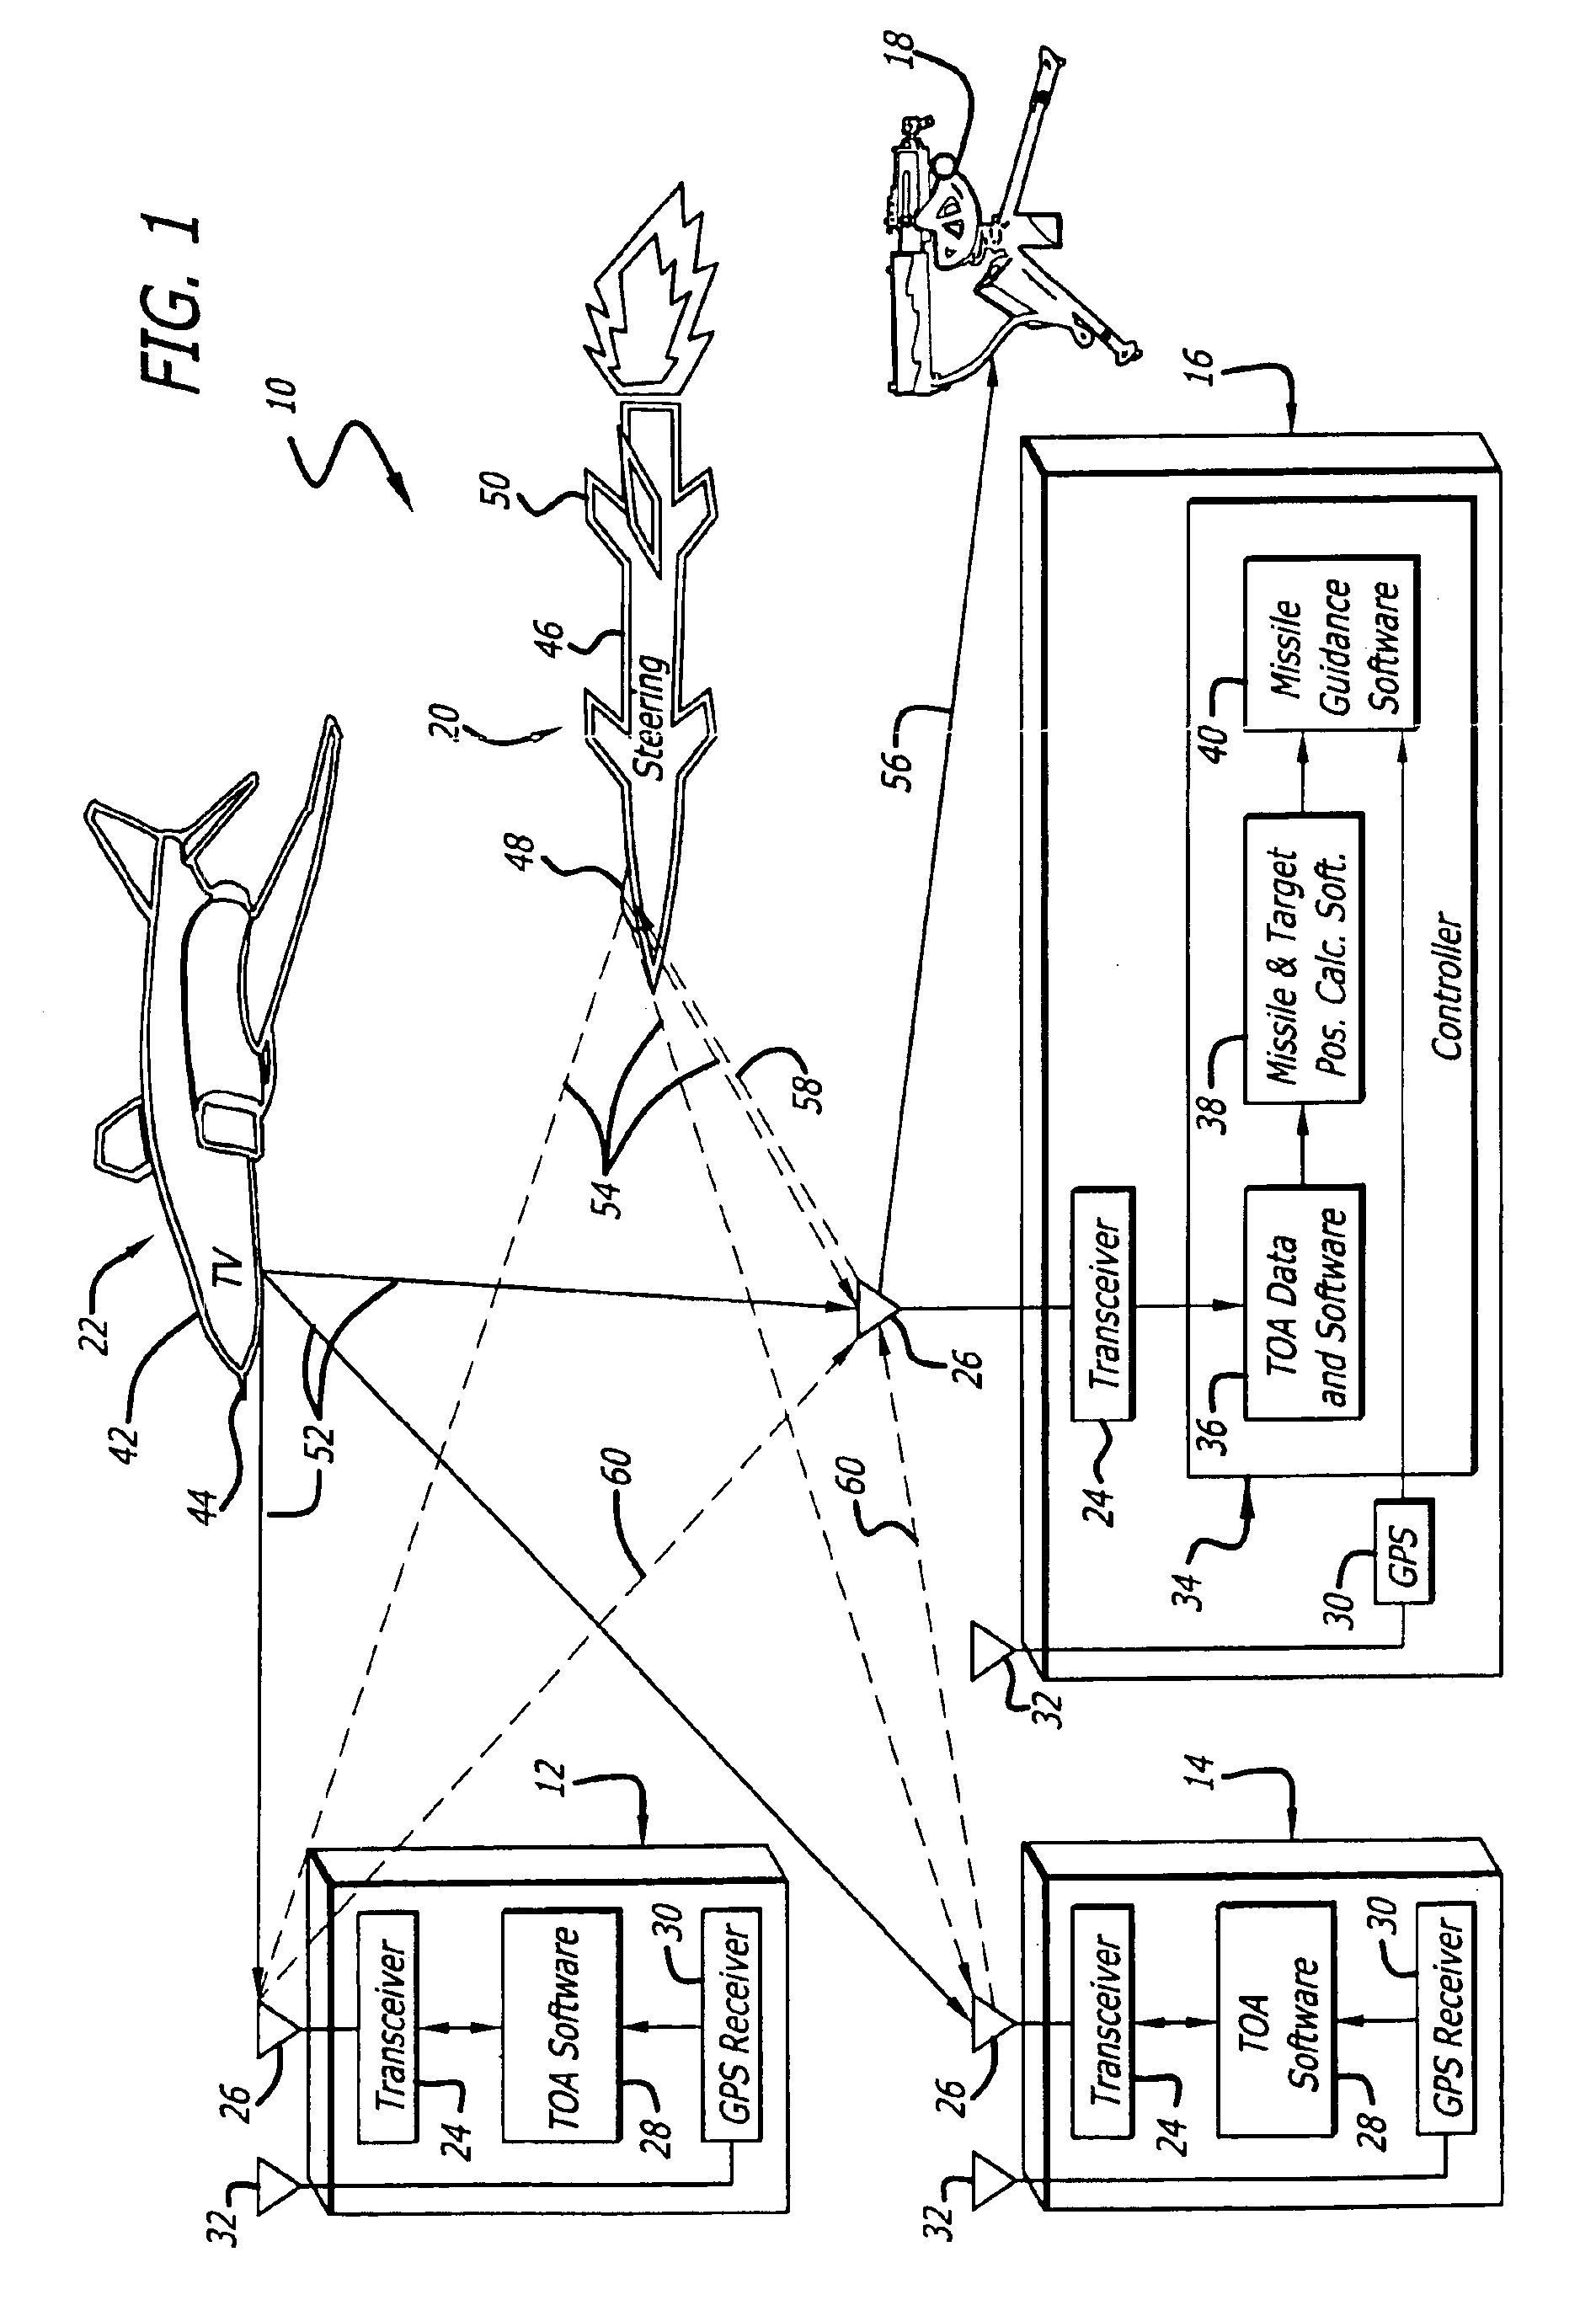 System and method for locating a target and guiding a vehicle toward the target